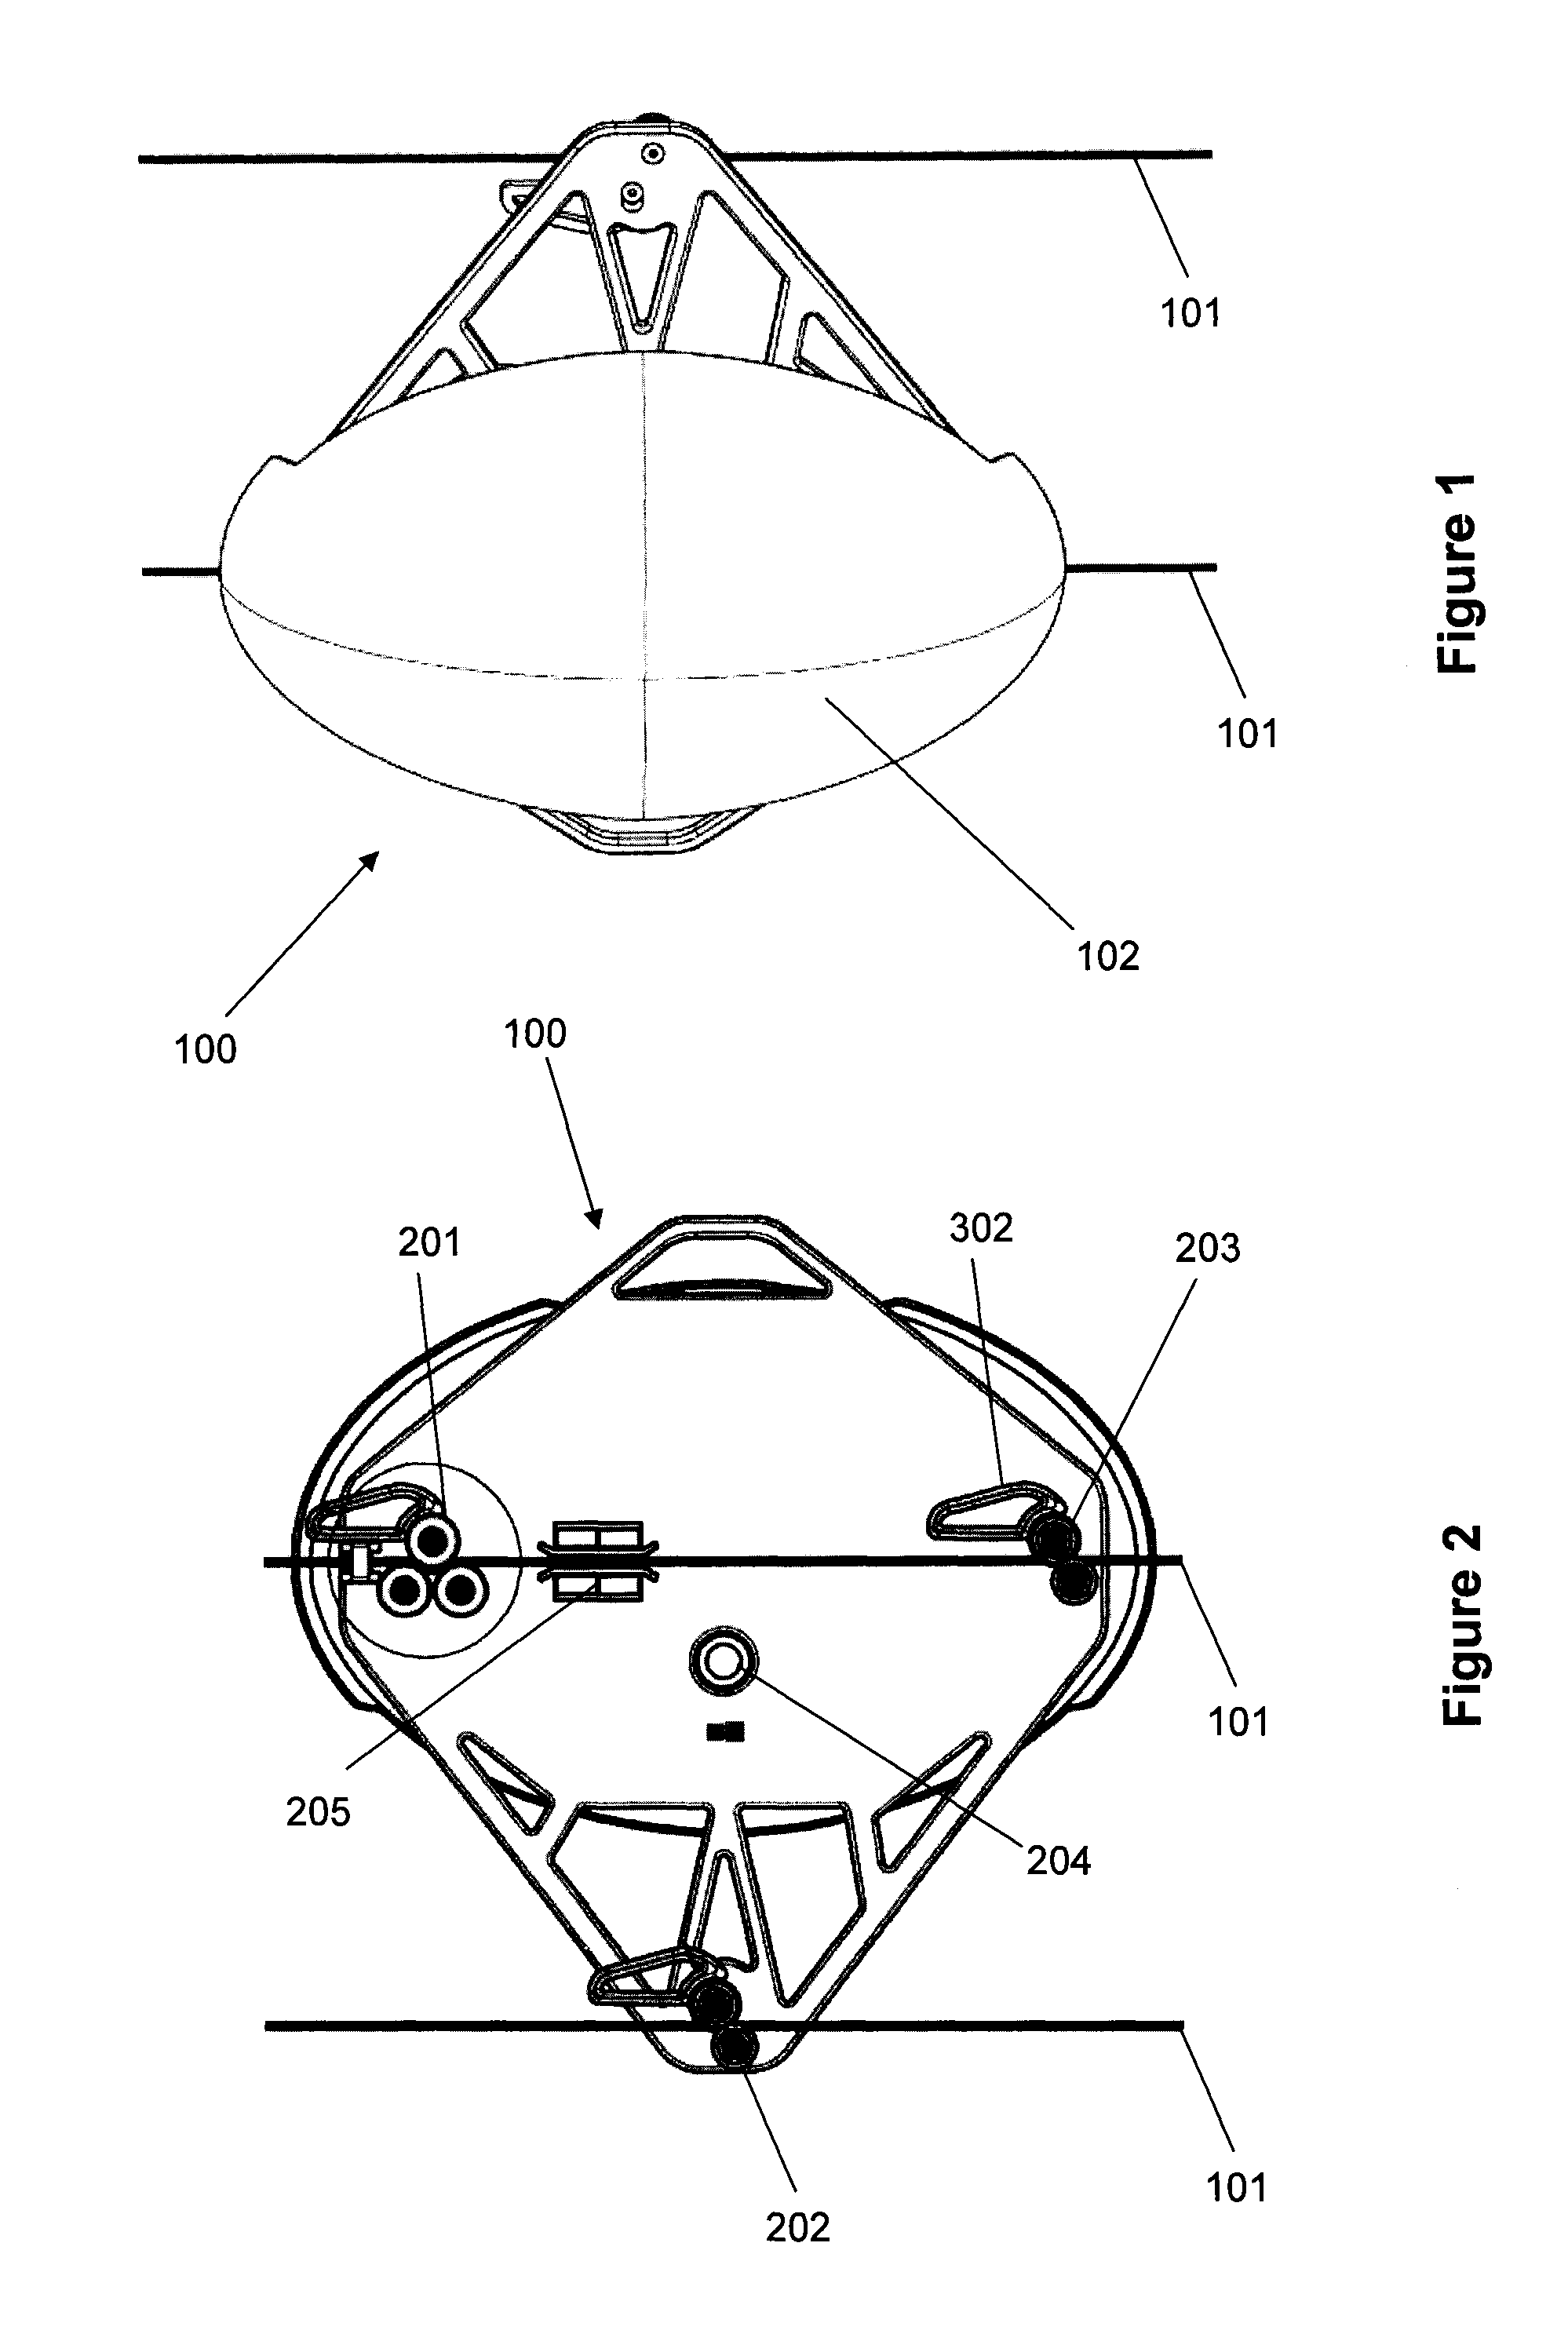 Building inspection device